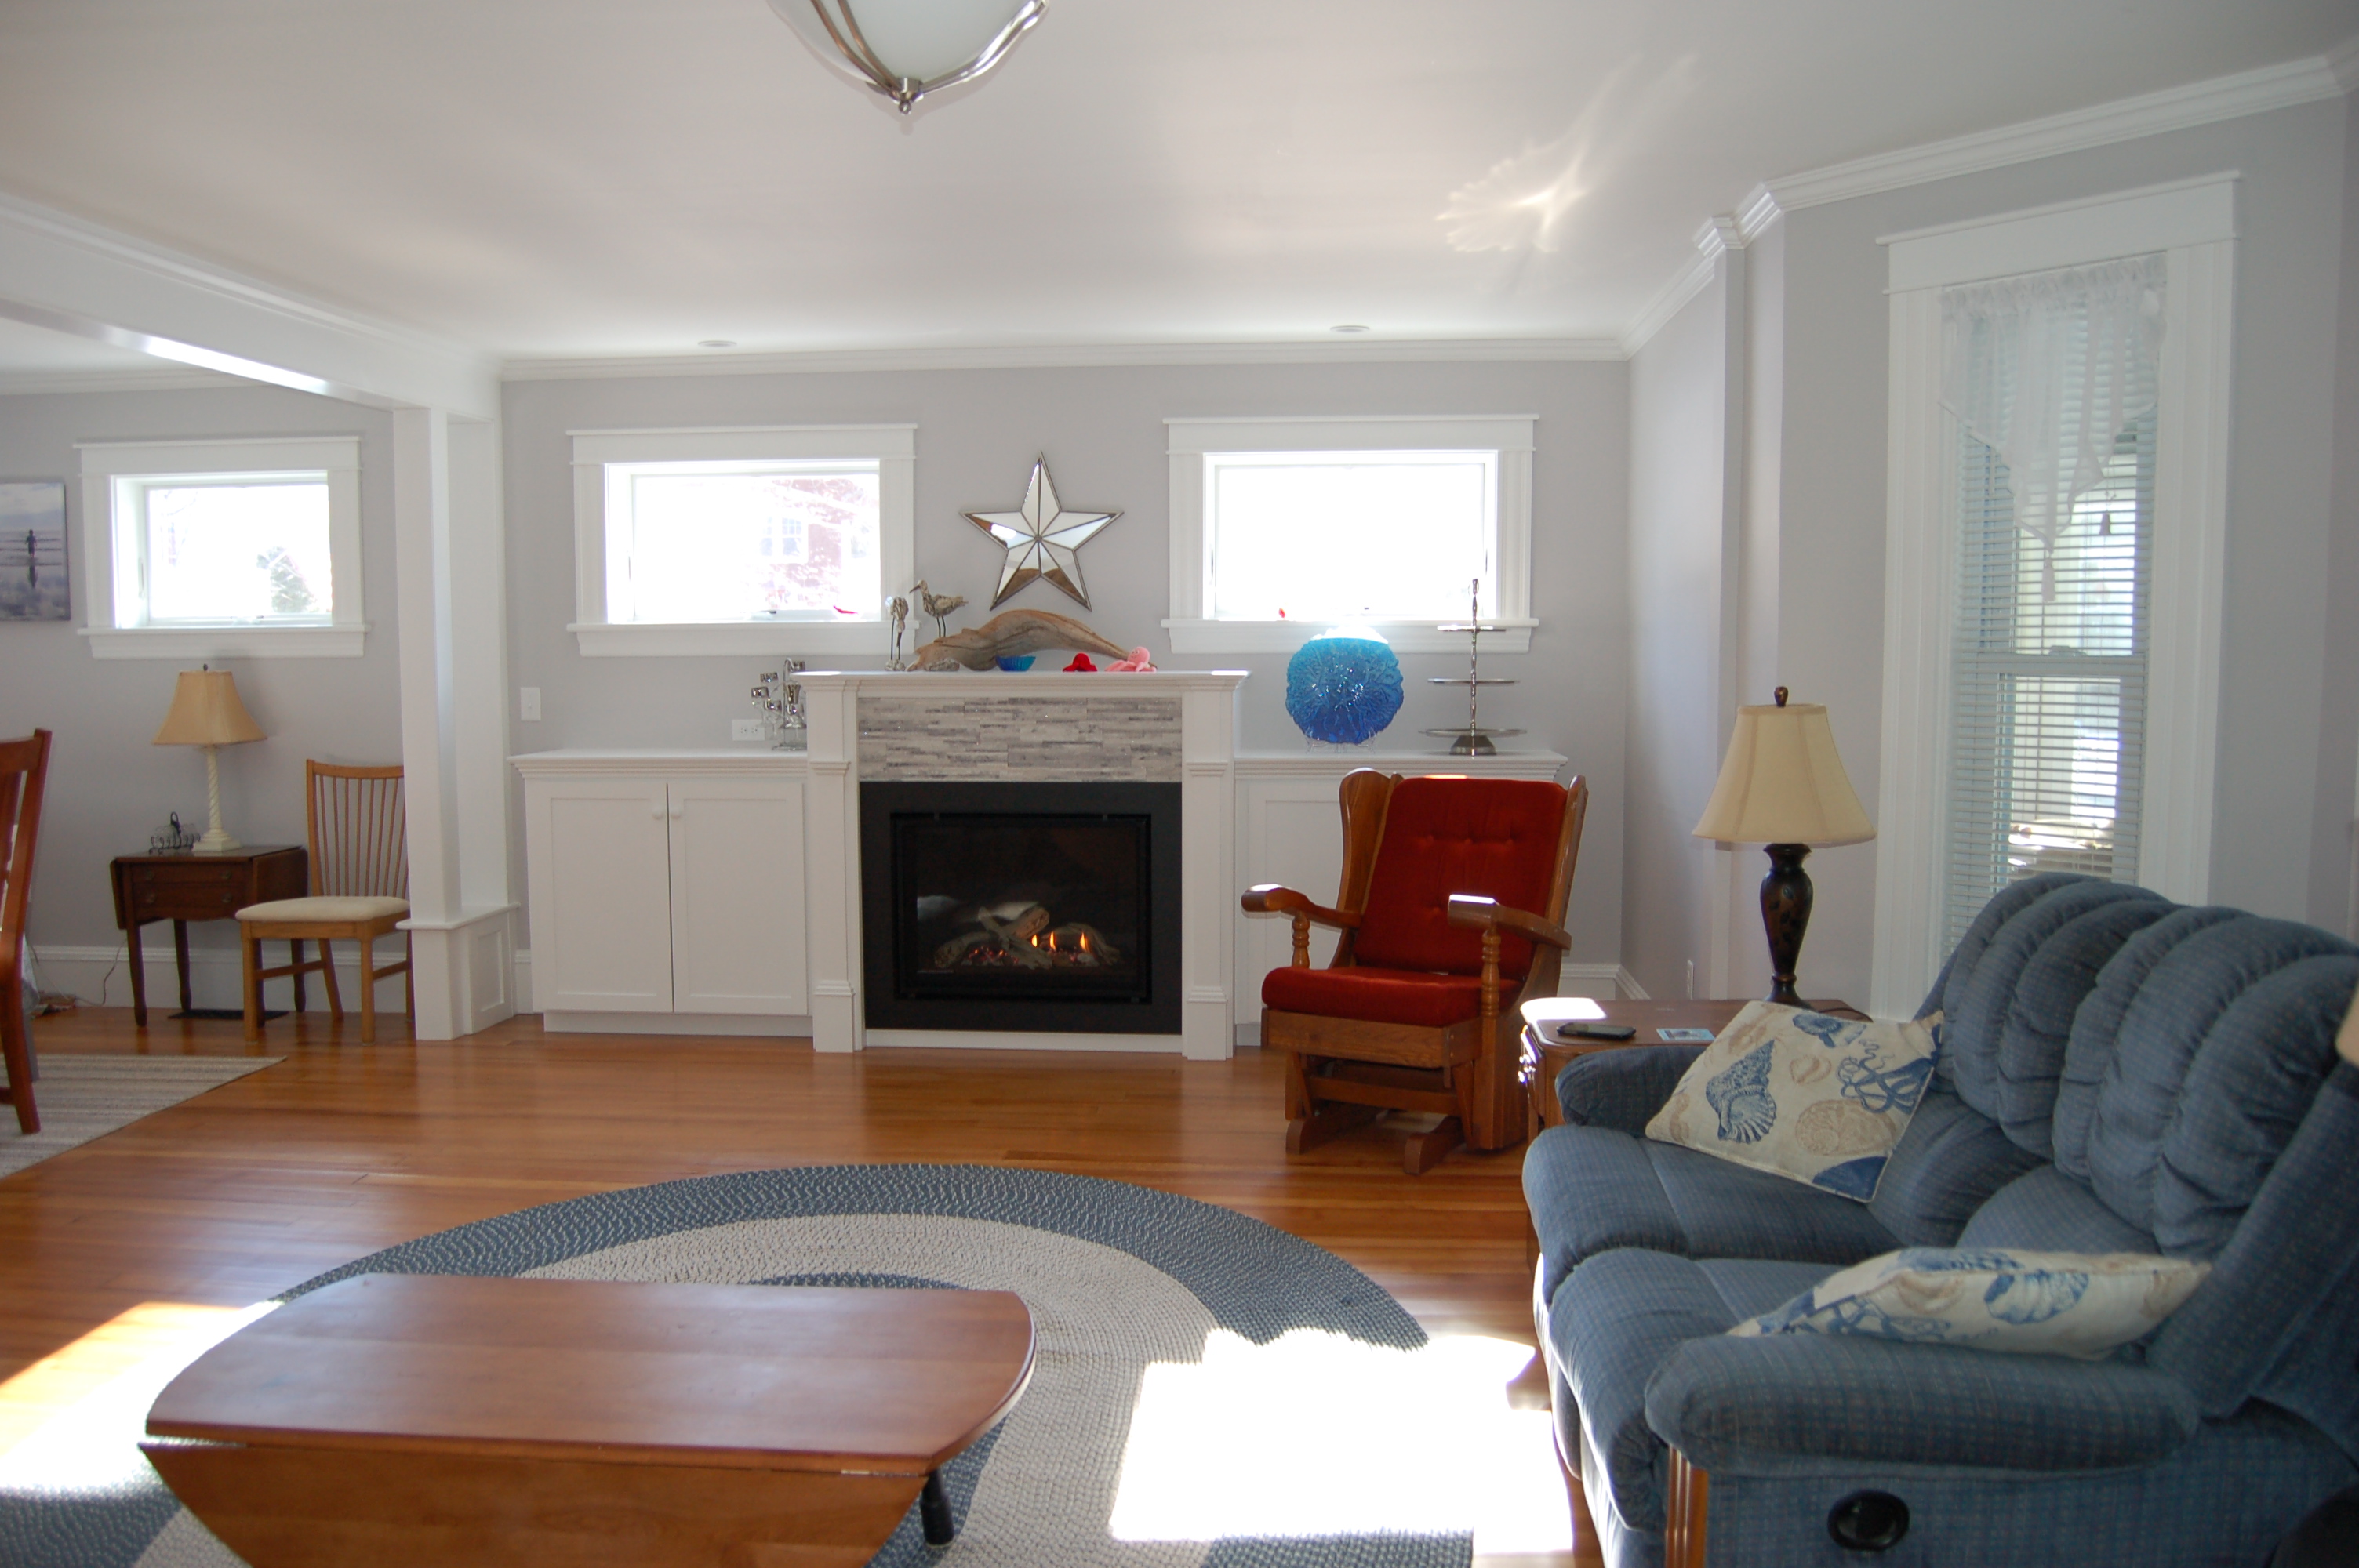 55-MAIN-STREET-LIVING-ROOM-WITH-FIREPLACE-VIEW